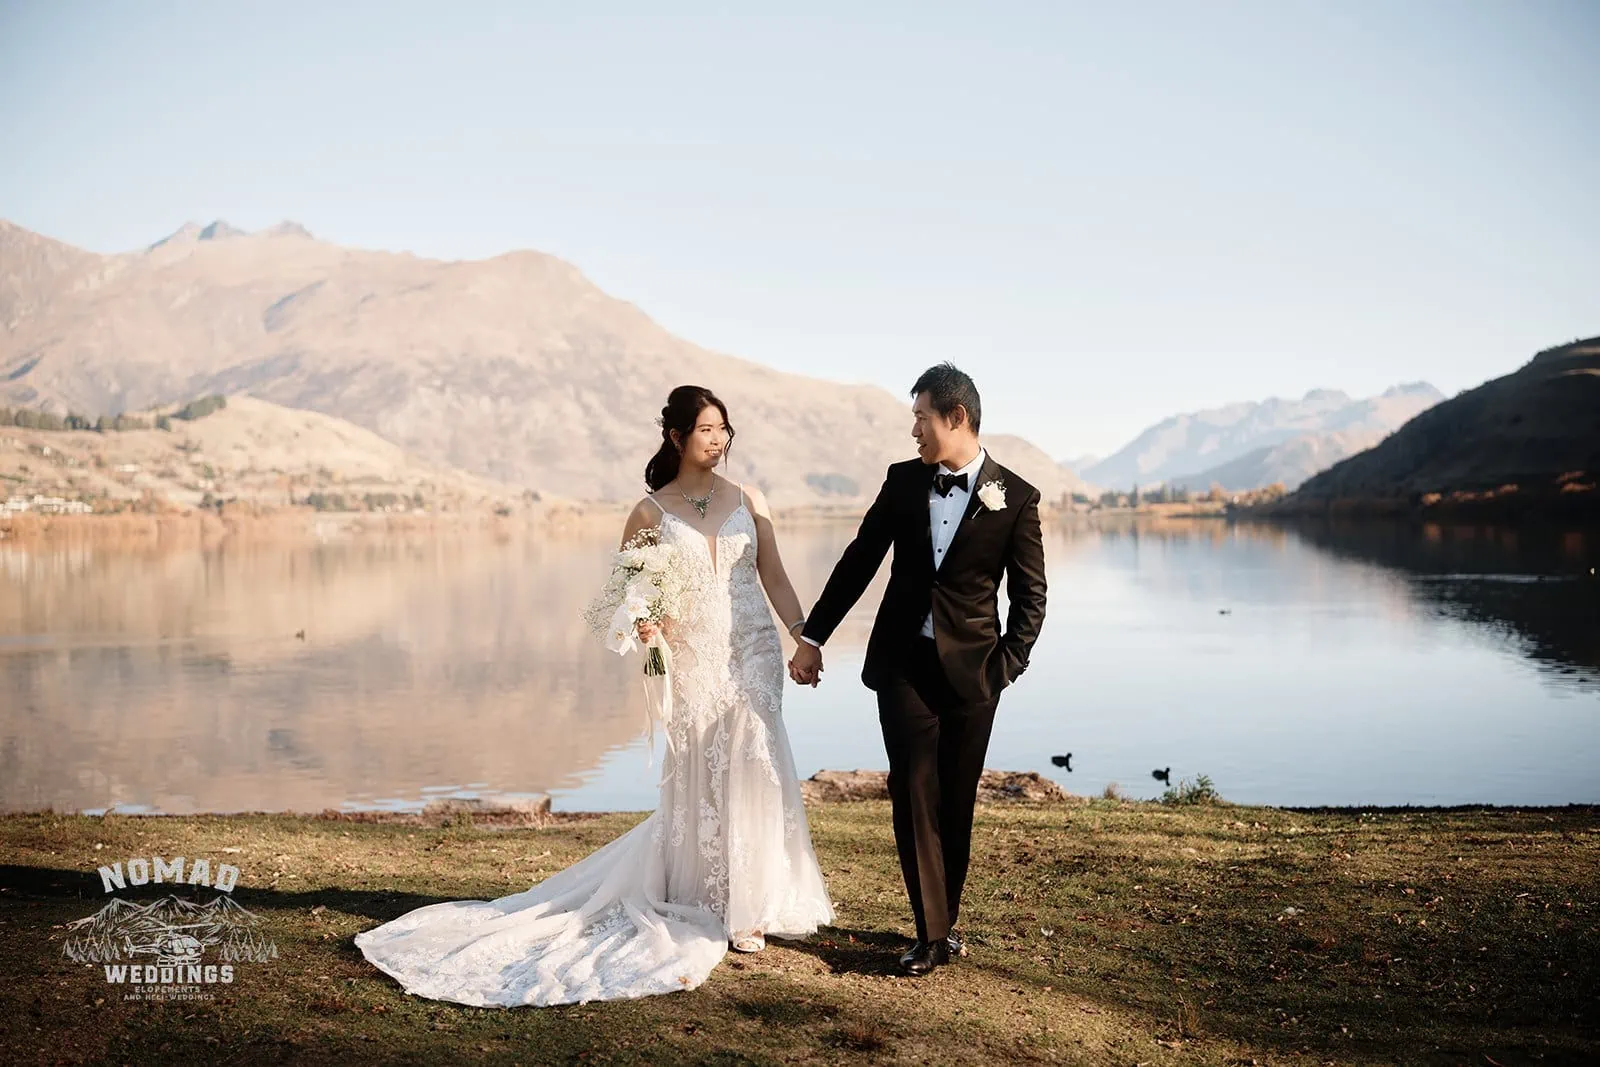 Connie and Andrew's Remarkables Heli Pre Wedding Shoot captures them standing in front of a lake with mountains in the background.